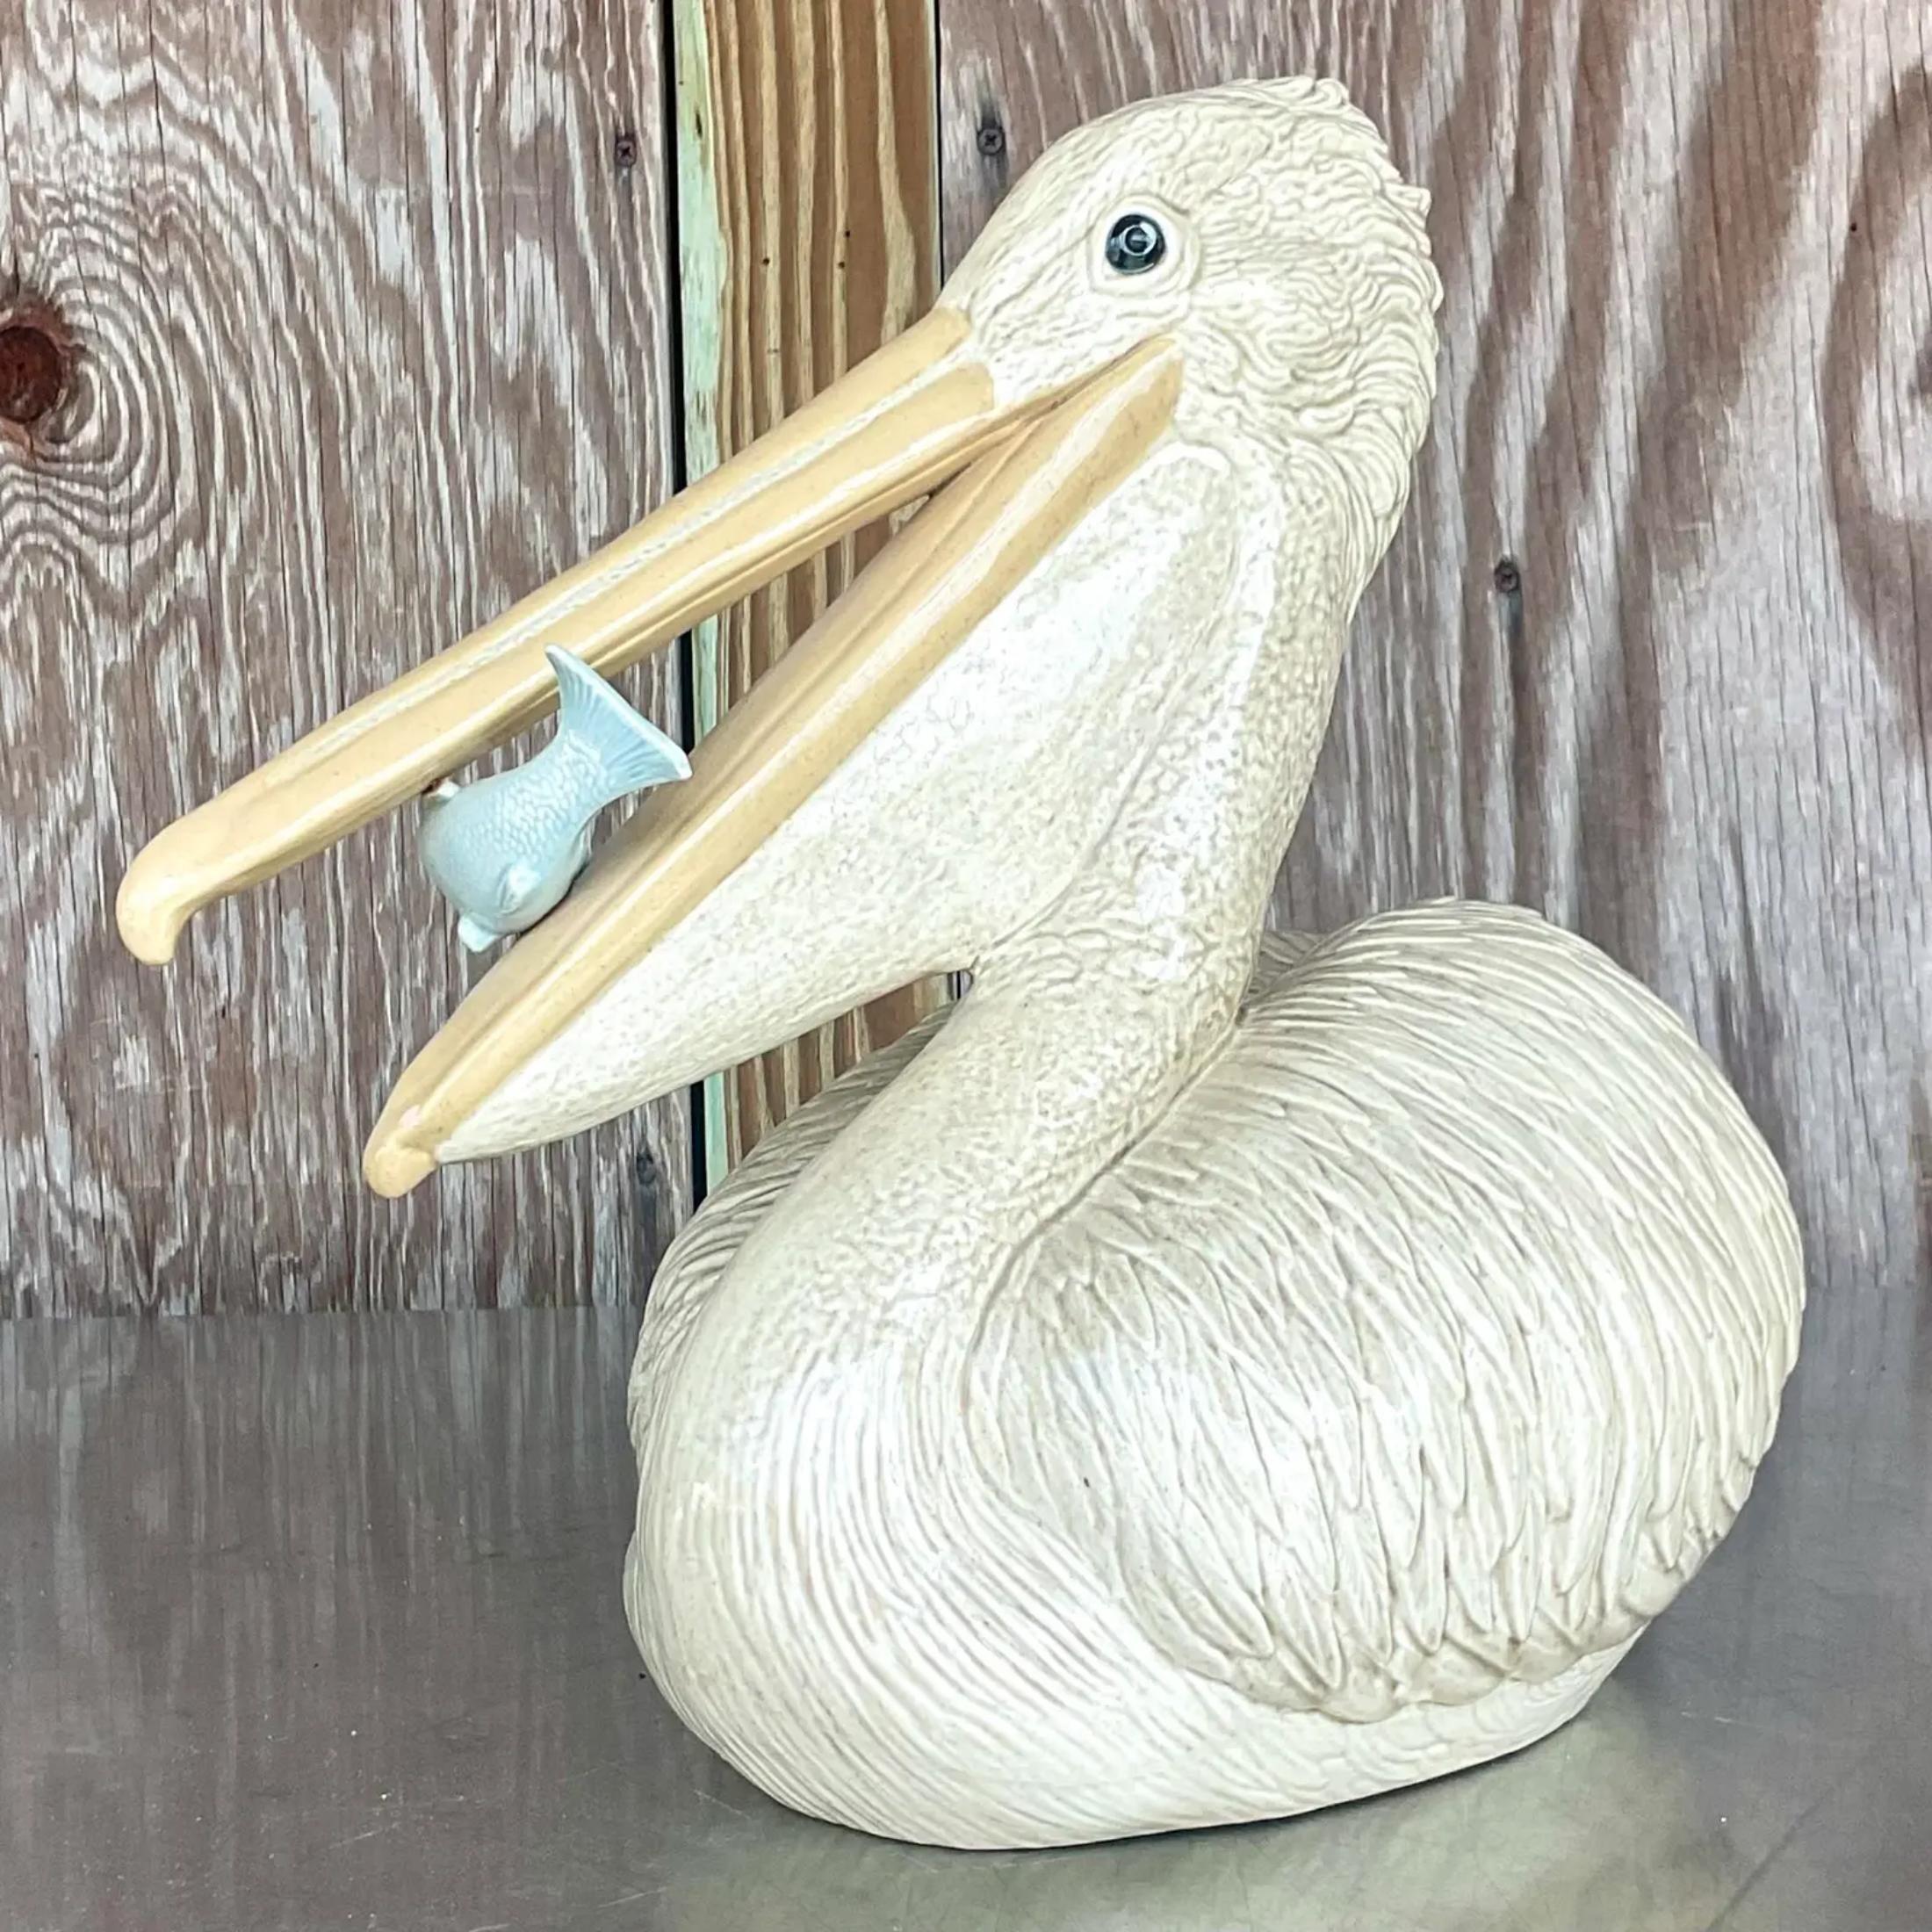 A fabulous vintage Coastal pelican. A chic glazed ceramic with a hand painted finish. Acquired from a Palm Beach estate